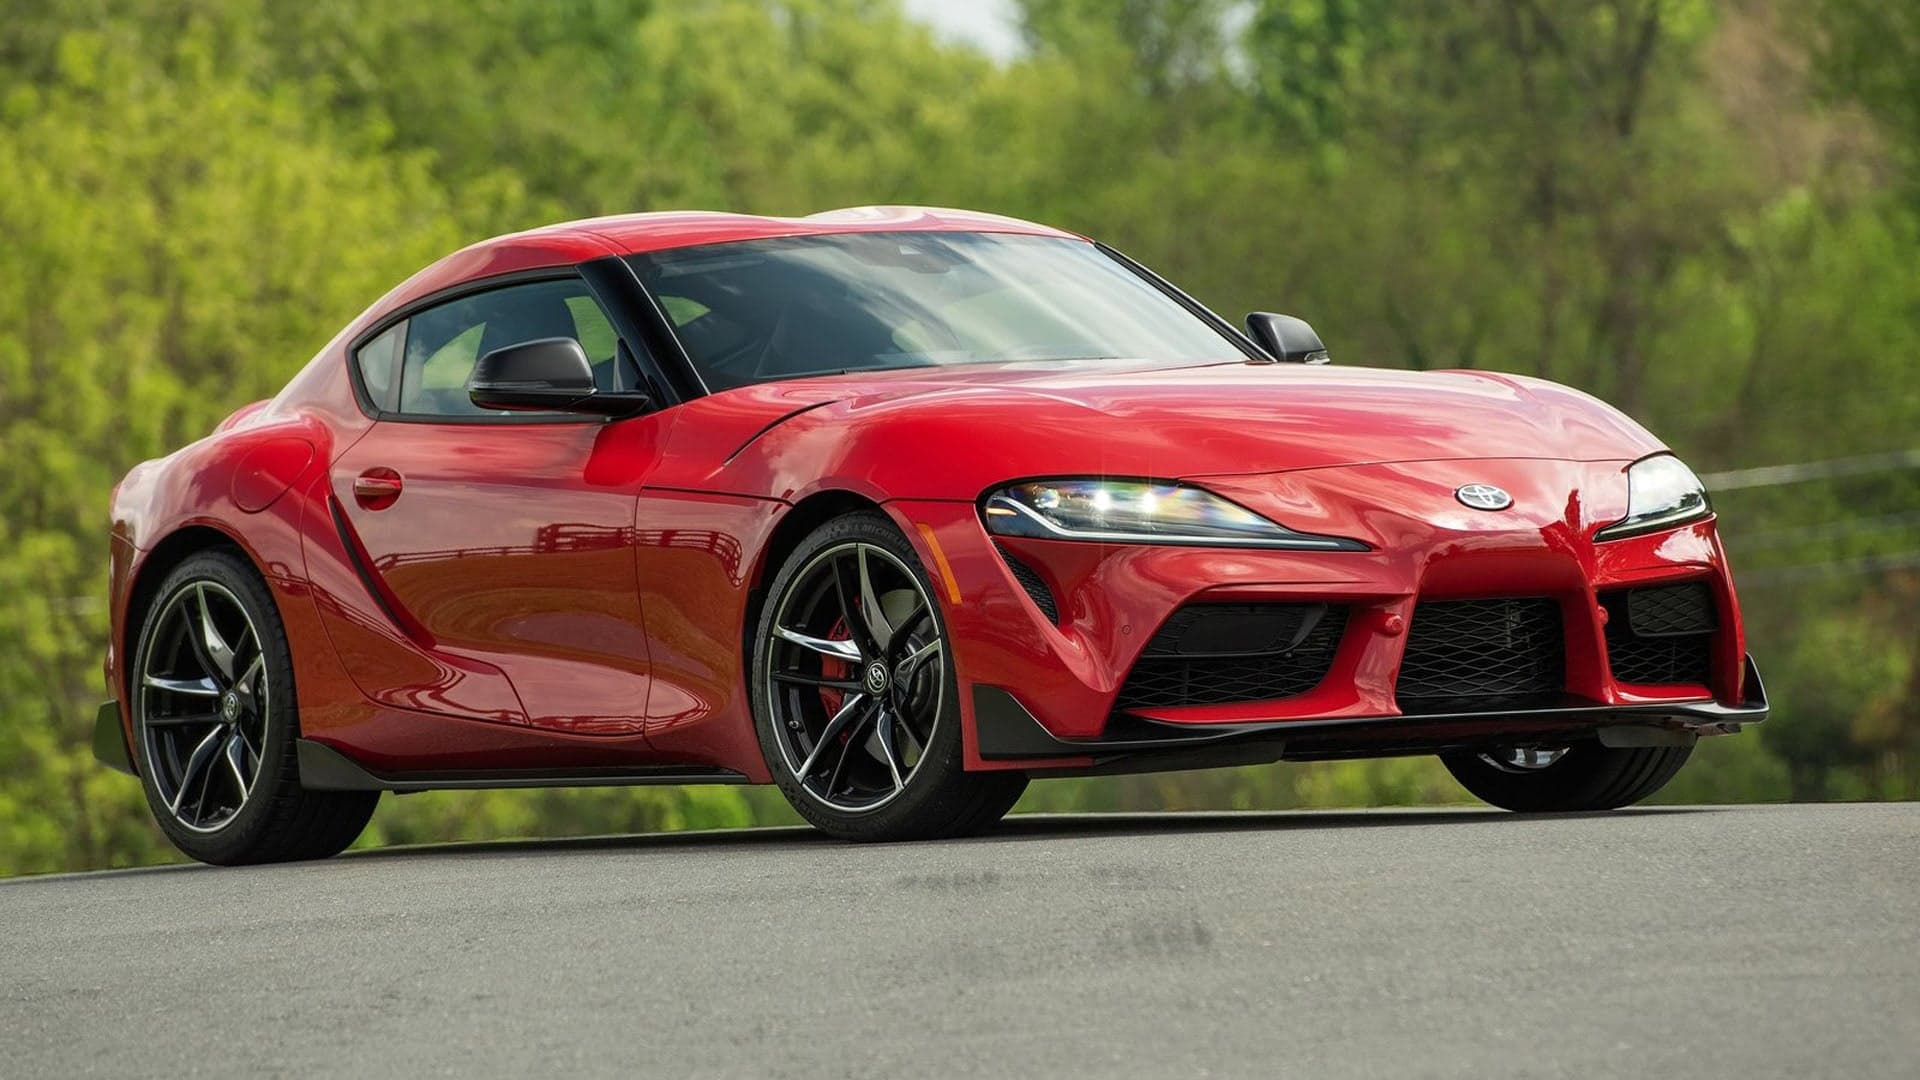 Toyota Supra With a Manual Transmission Confirmed for US: Source